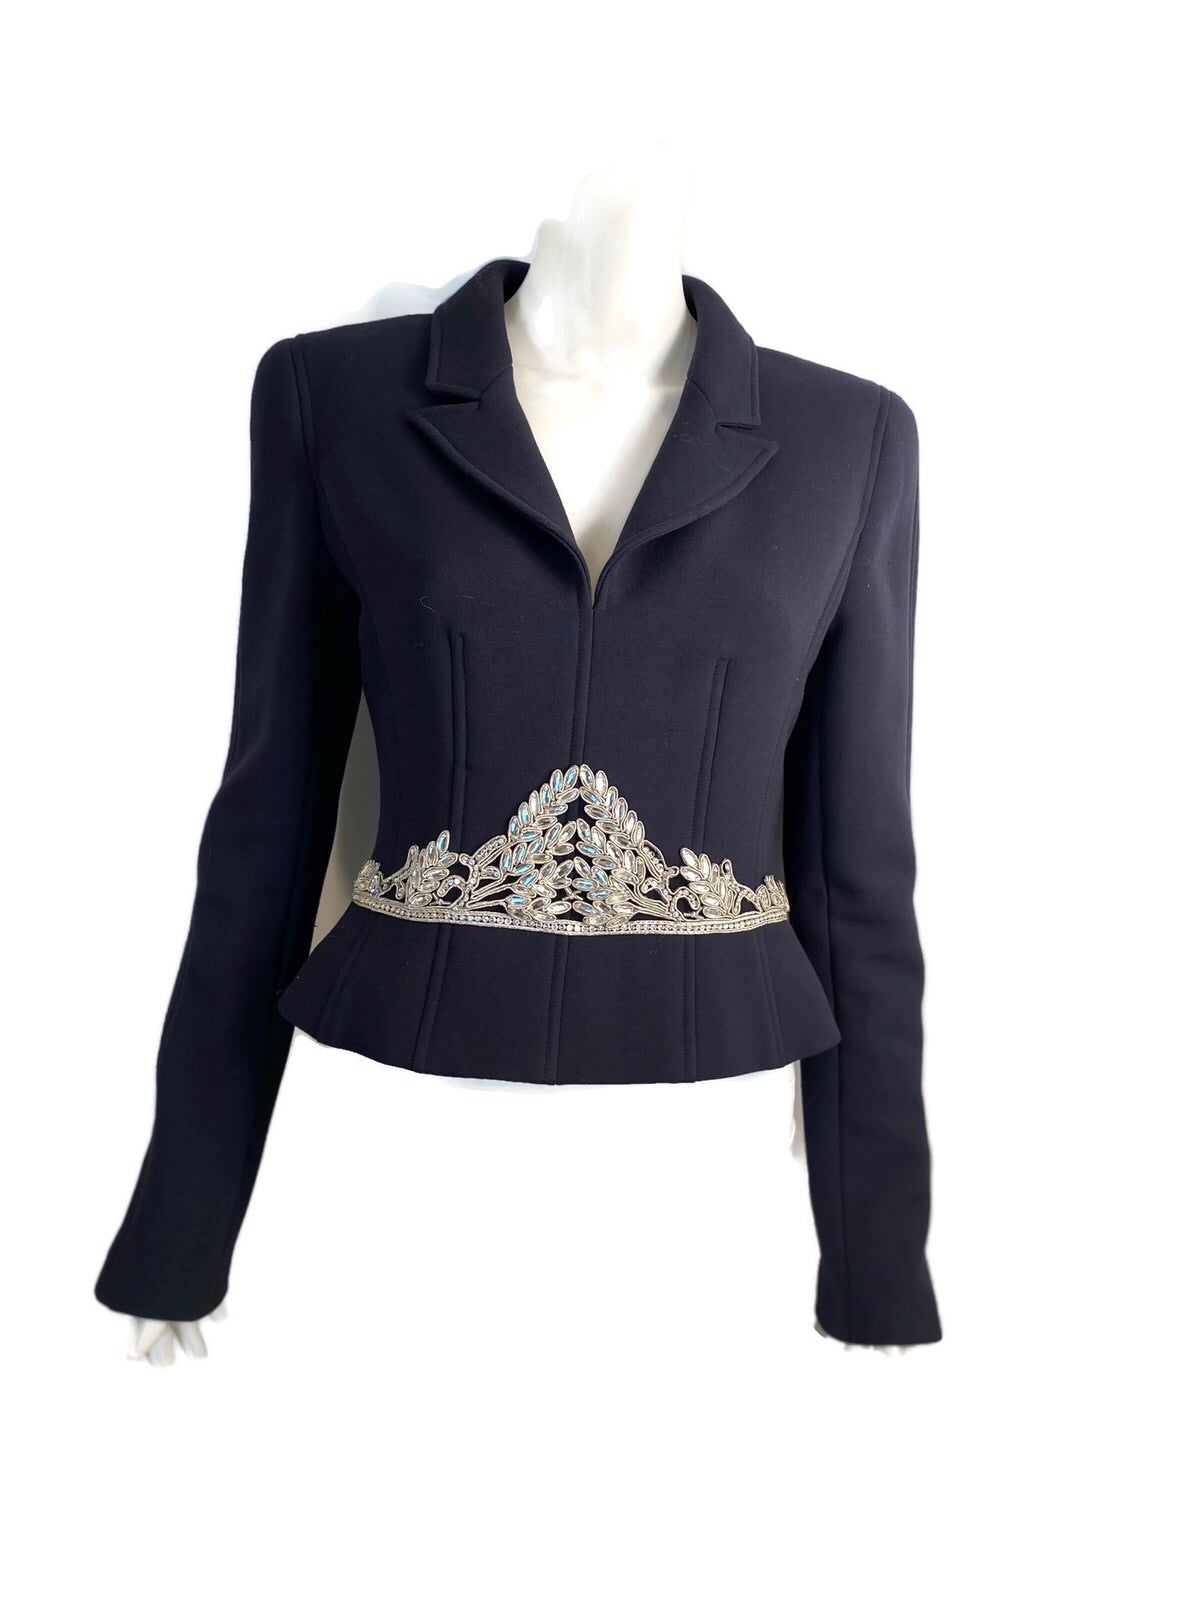 HelensChanel Rare Chanel 02A 2002 Fall Black Fitted Jacket with Crystal Embellishments FR 40 US 4/6